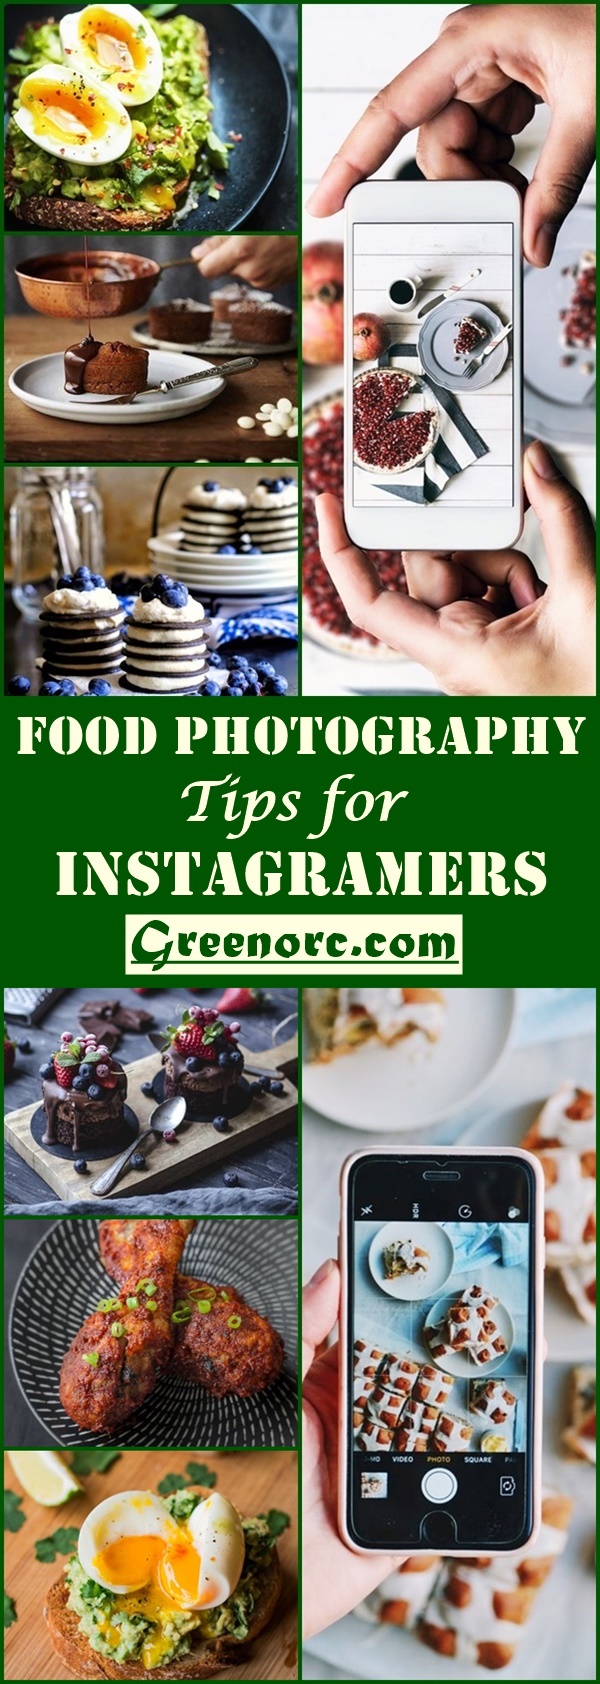 Food Photography Tips for Instagramers